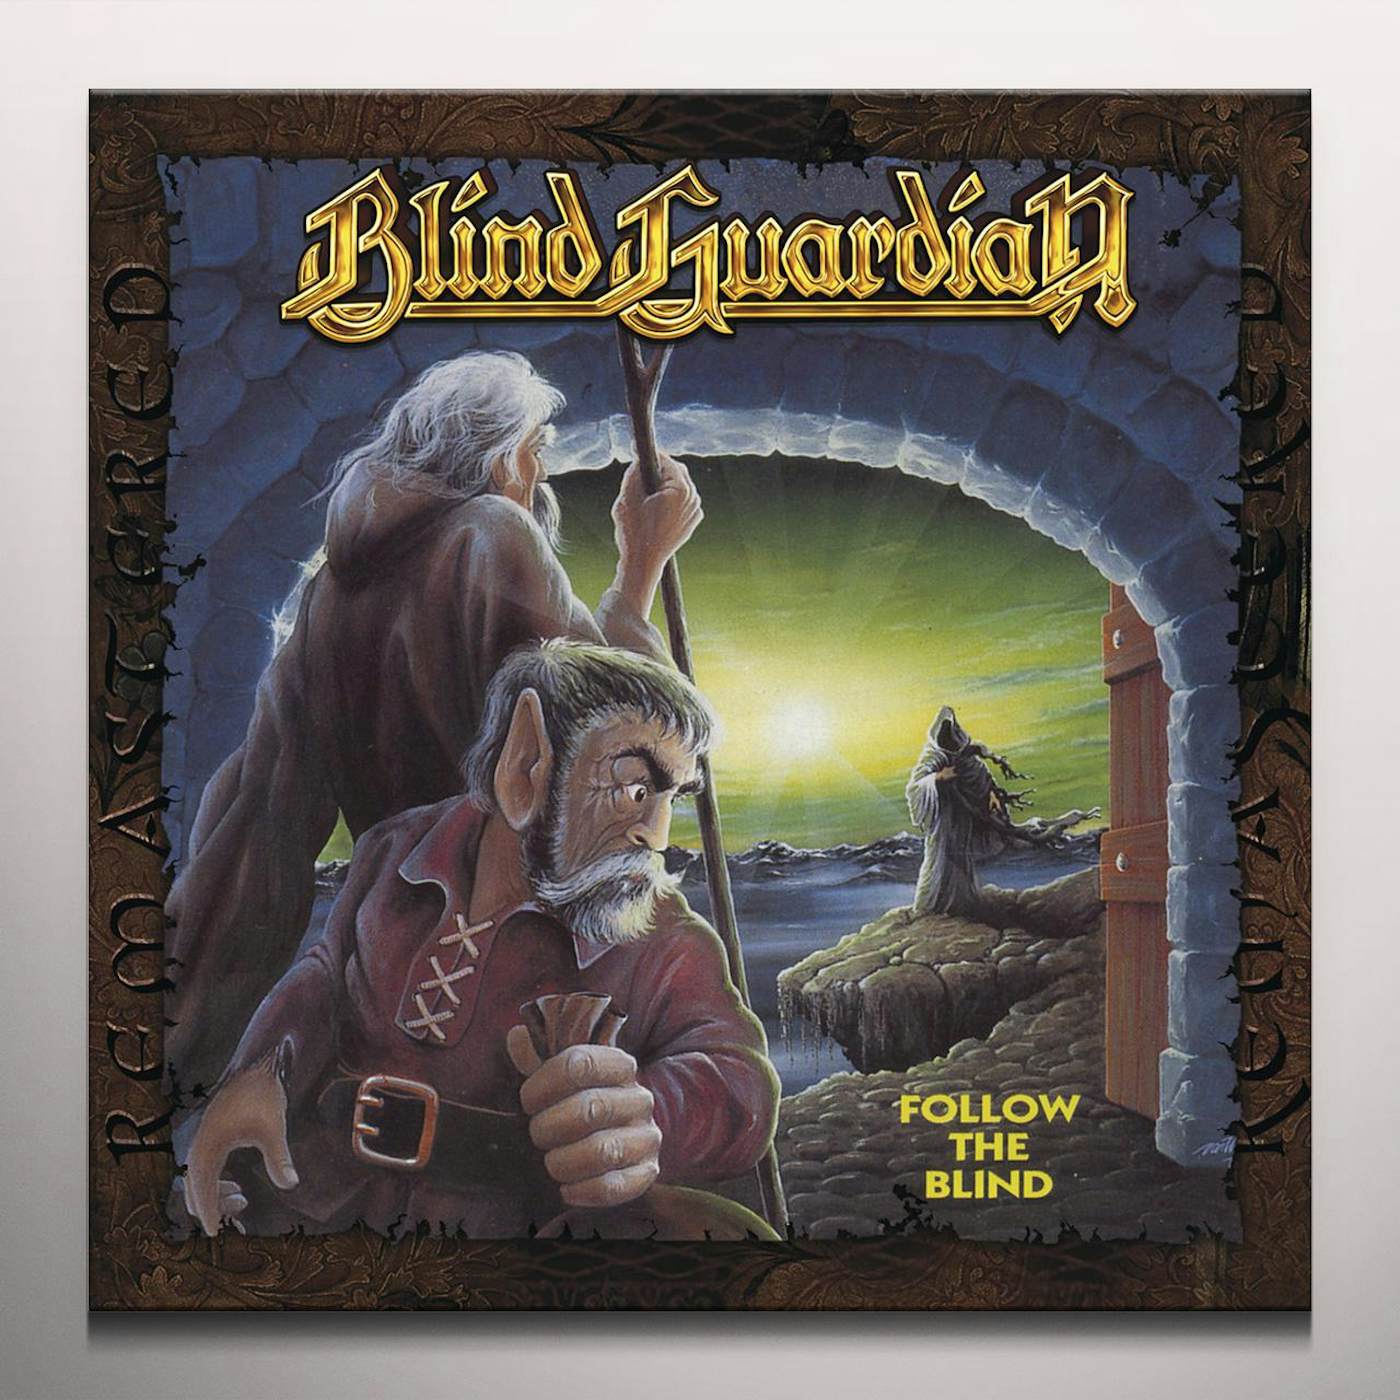 Blind Guardian FOLLOW THE BLIND (REMIXED 2007) - Limited Edition Blue Colored Vinyl Record